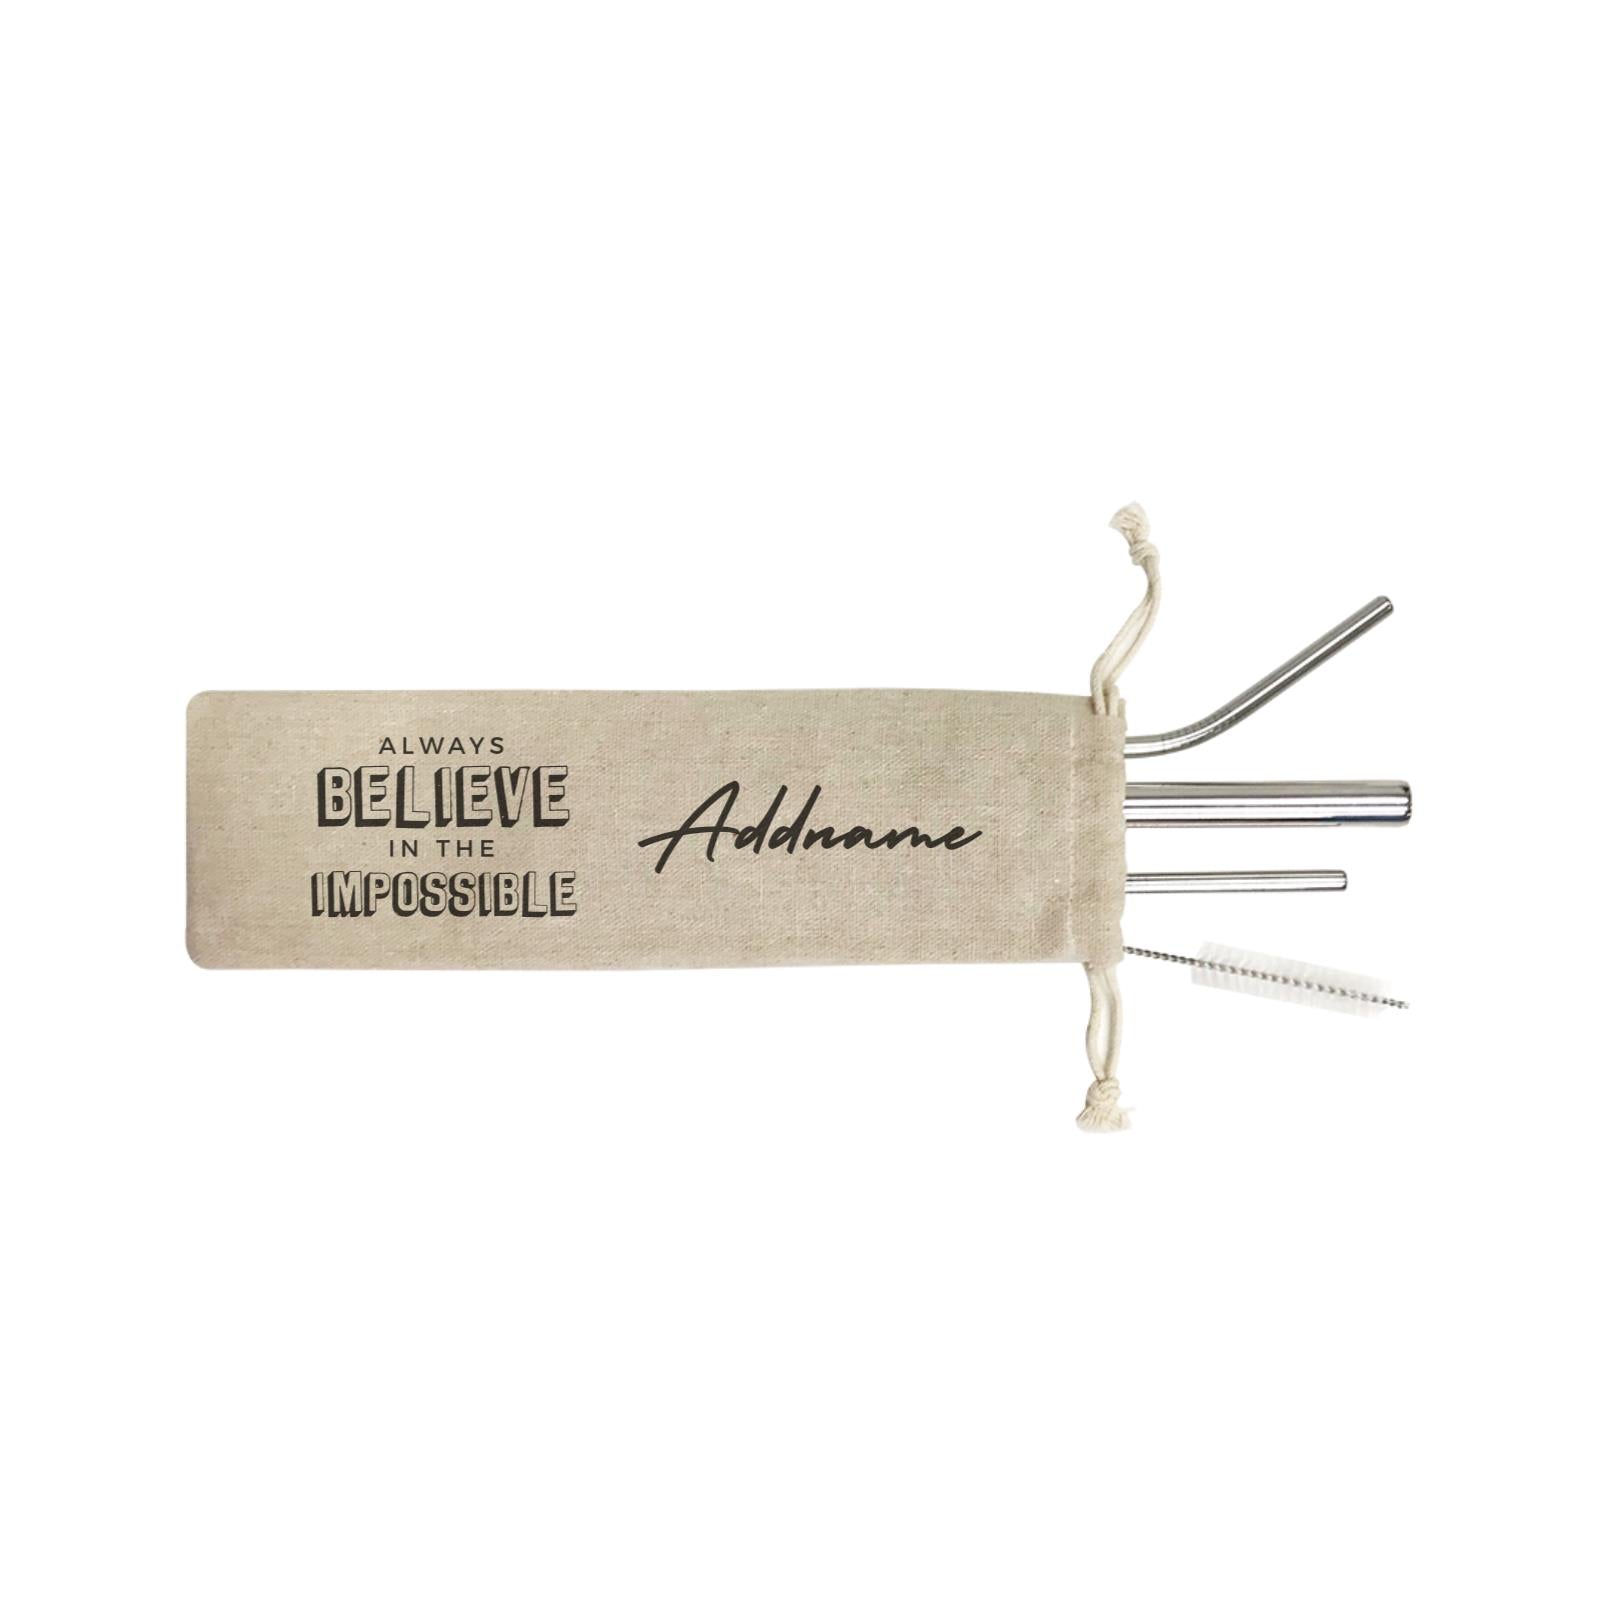 Impossible Quotes Always Believe in the Impossible Addname SB 4-in-1 Stainless Steel Straw Set In a Satchel